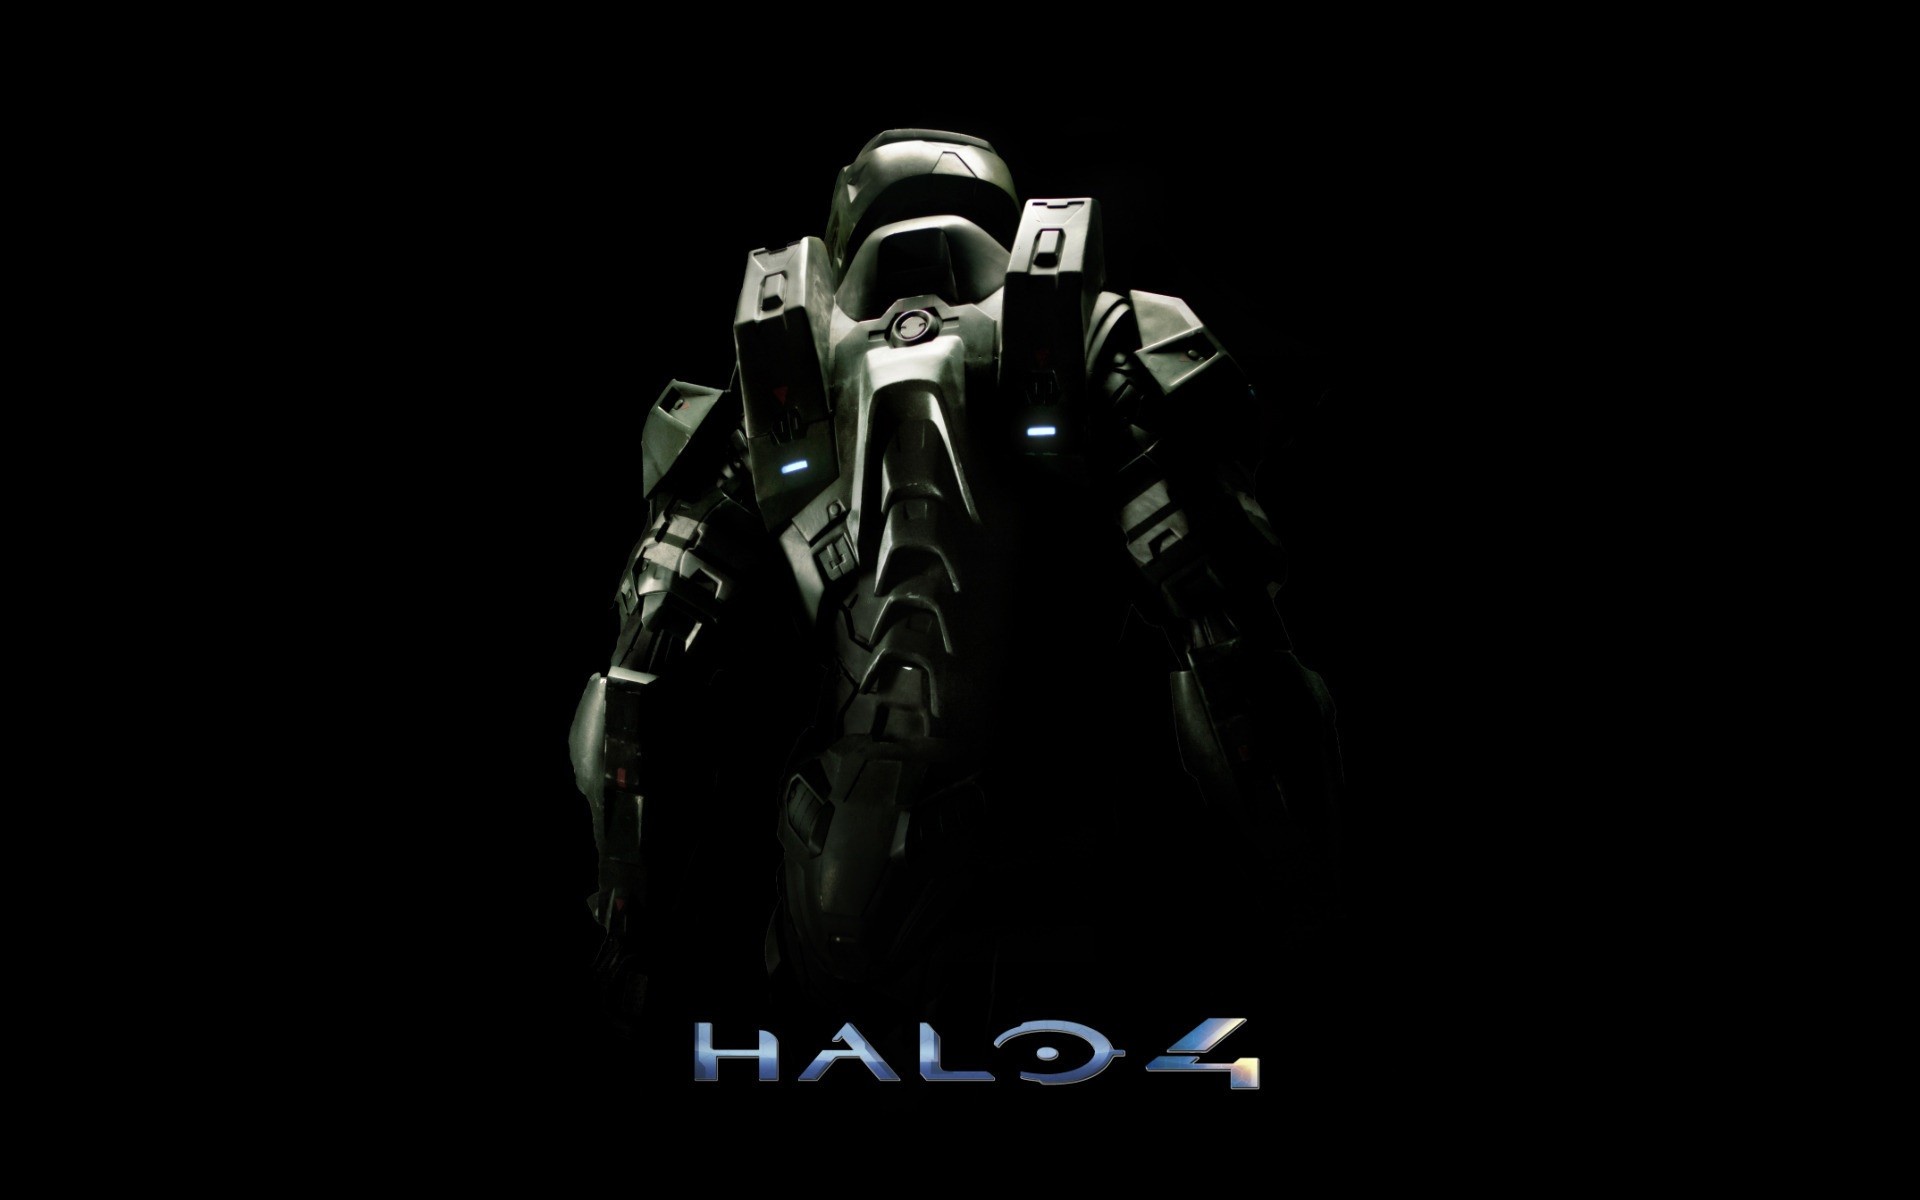 video Games, Halo, Halo 4, Master Chief, UNSC Infinity, 343 Industries, Spartans Wallpaper